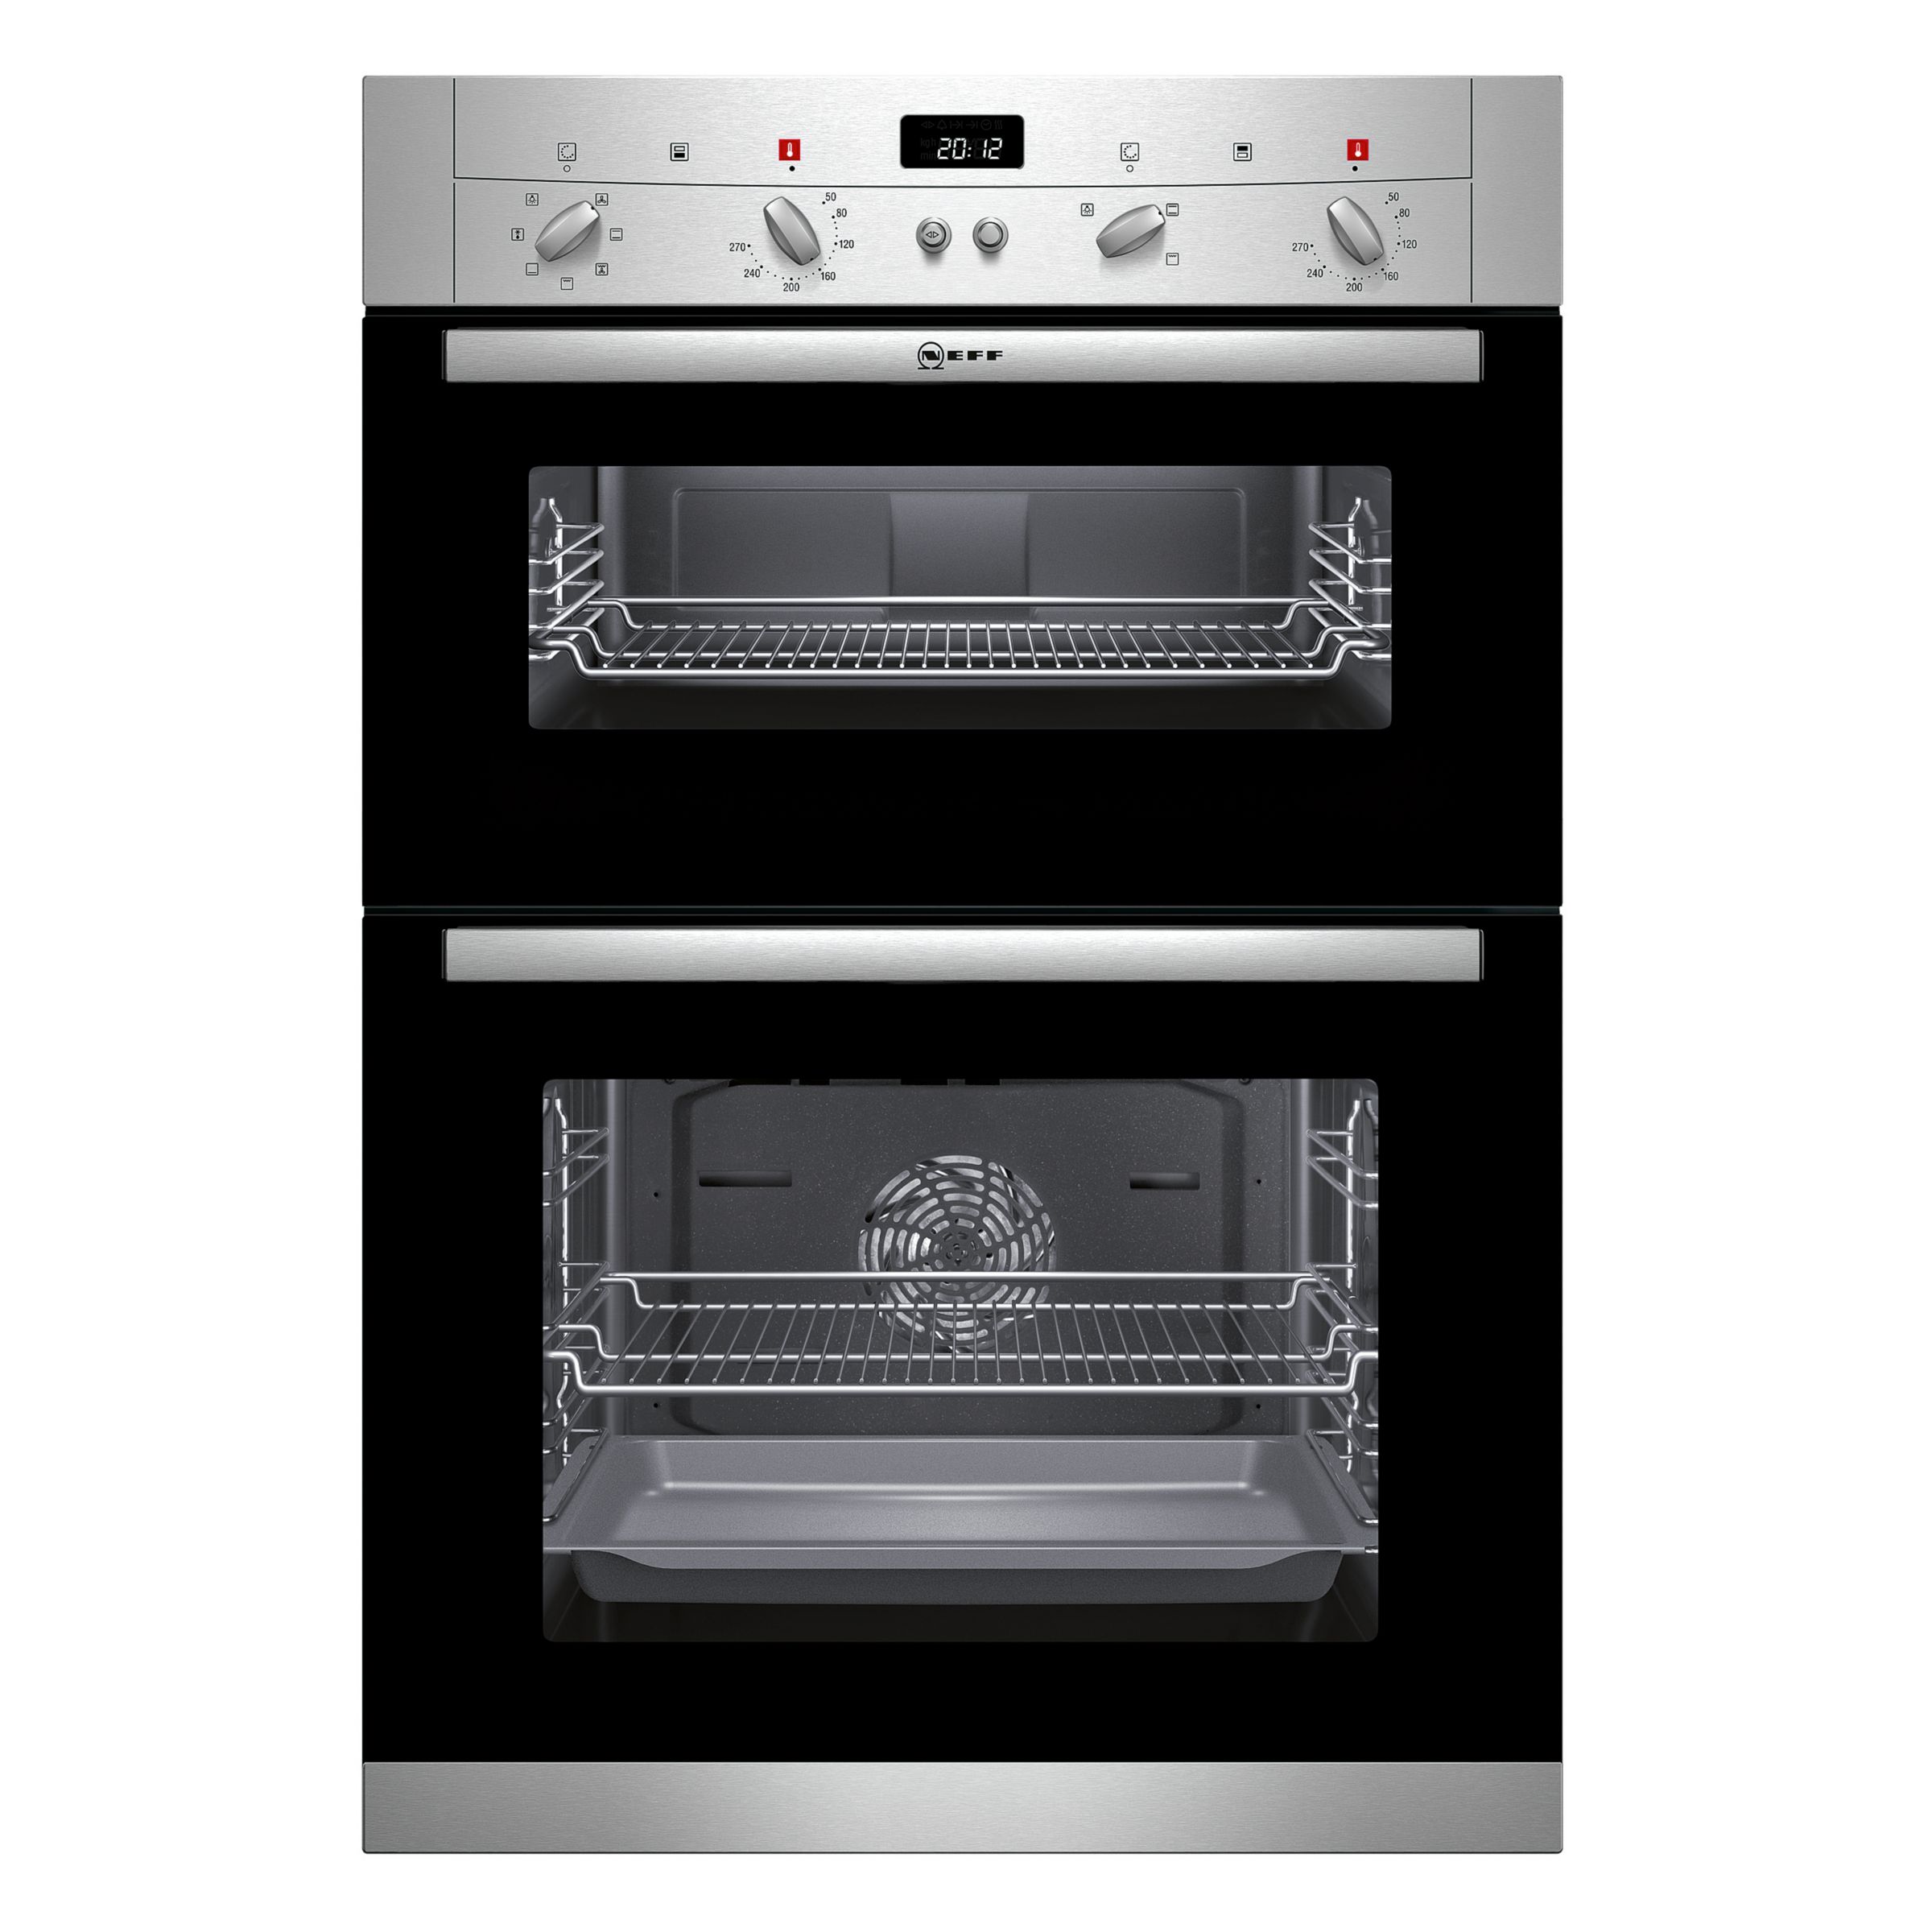 Neff U12S52N3GB Double Electric Oven, Stainless Steel